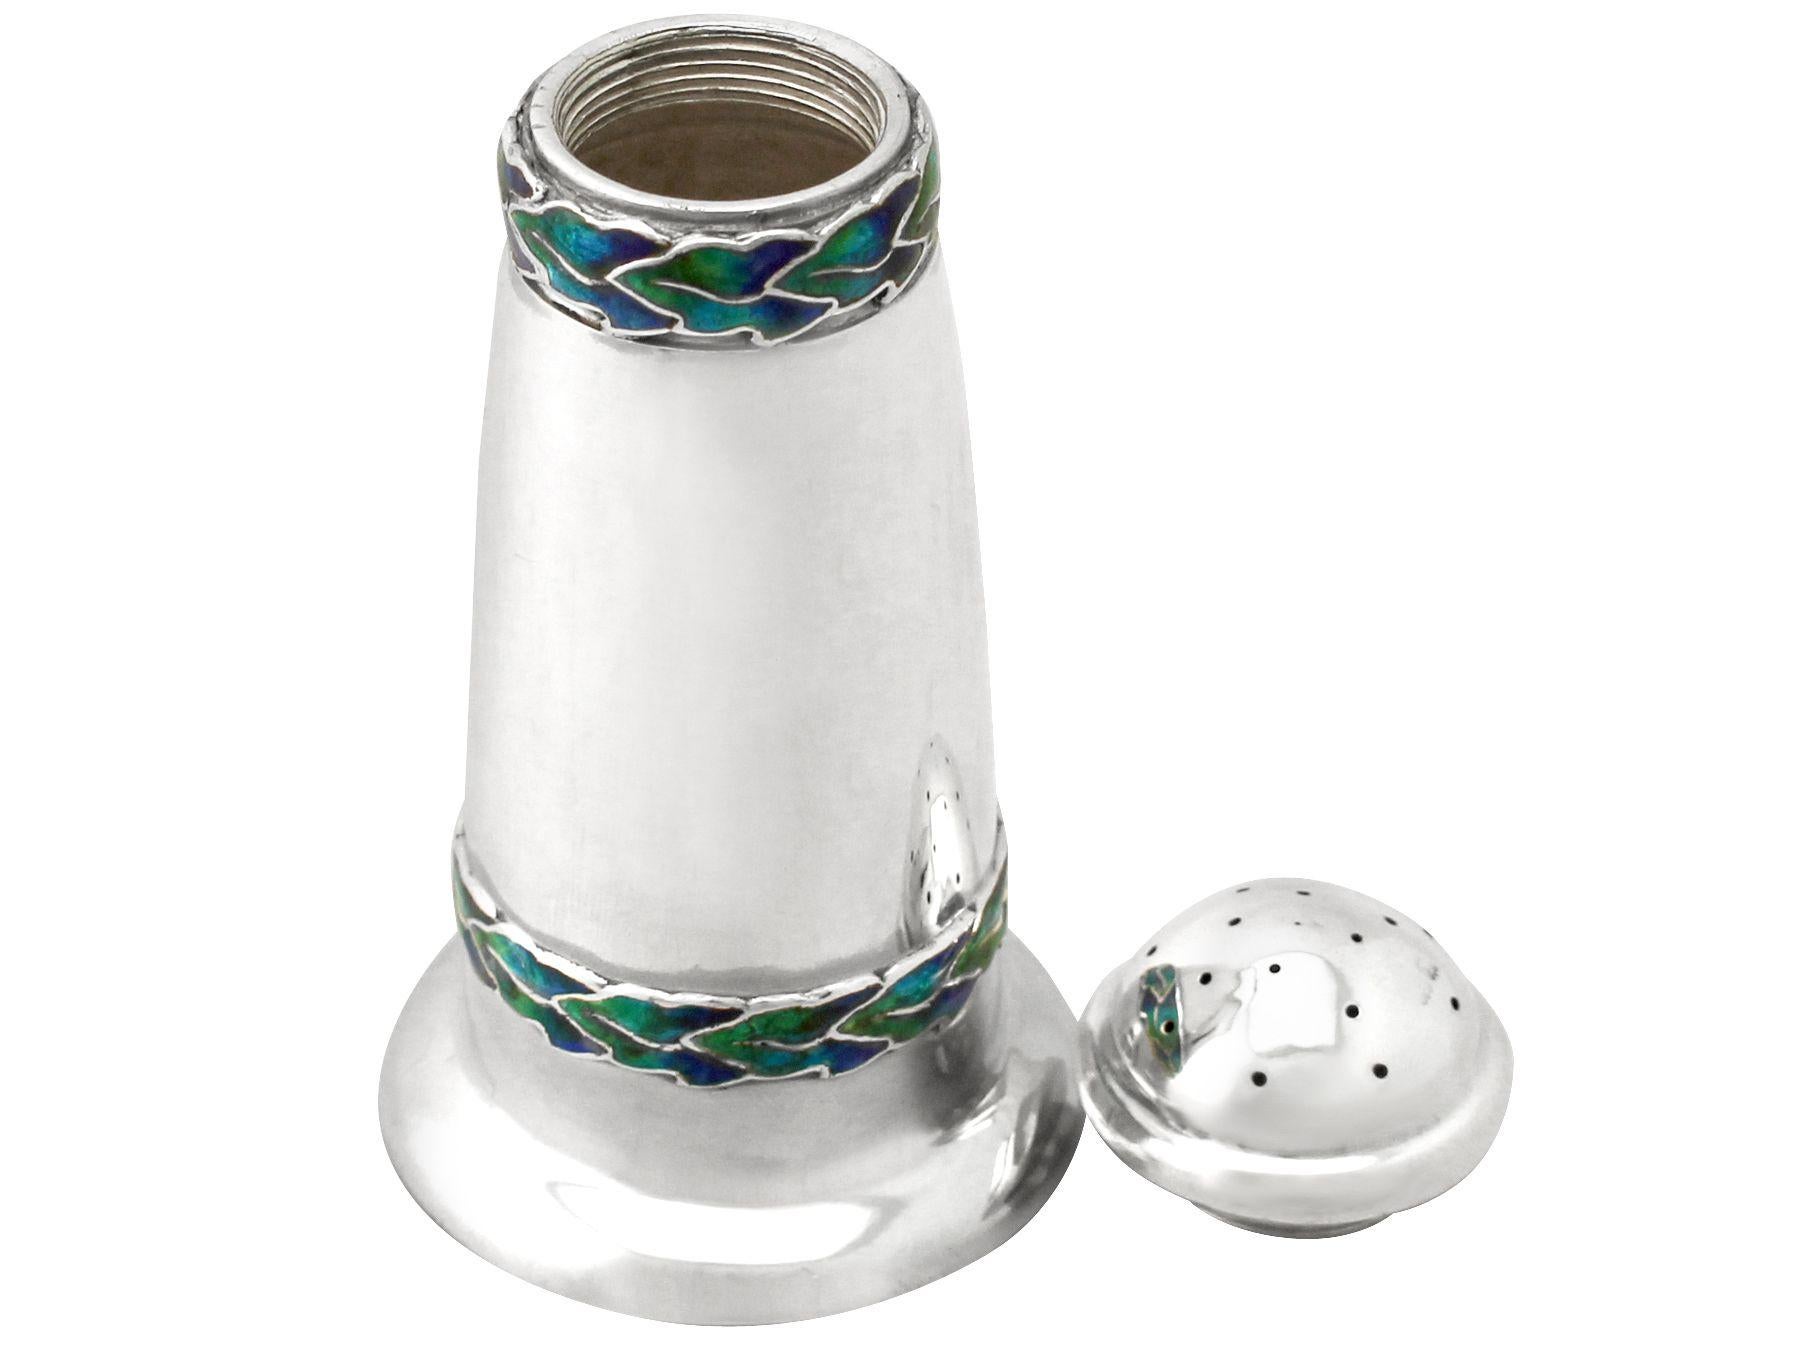 Arts and Crafts Antique Arts & Crafts Style Sterling Silver Pepper Shaker by Liberty & Co. Ltd For Sale